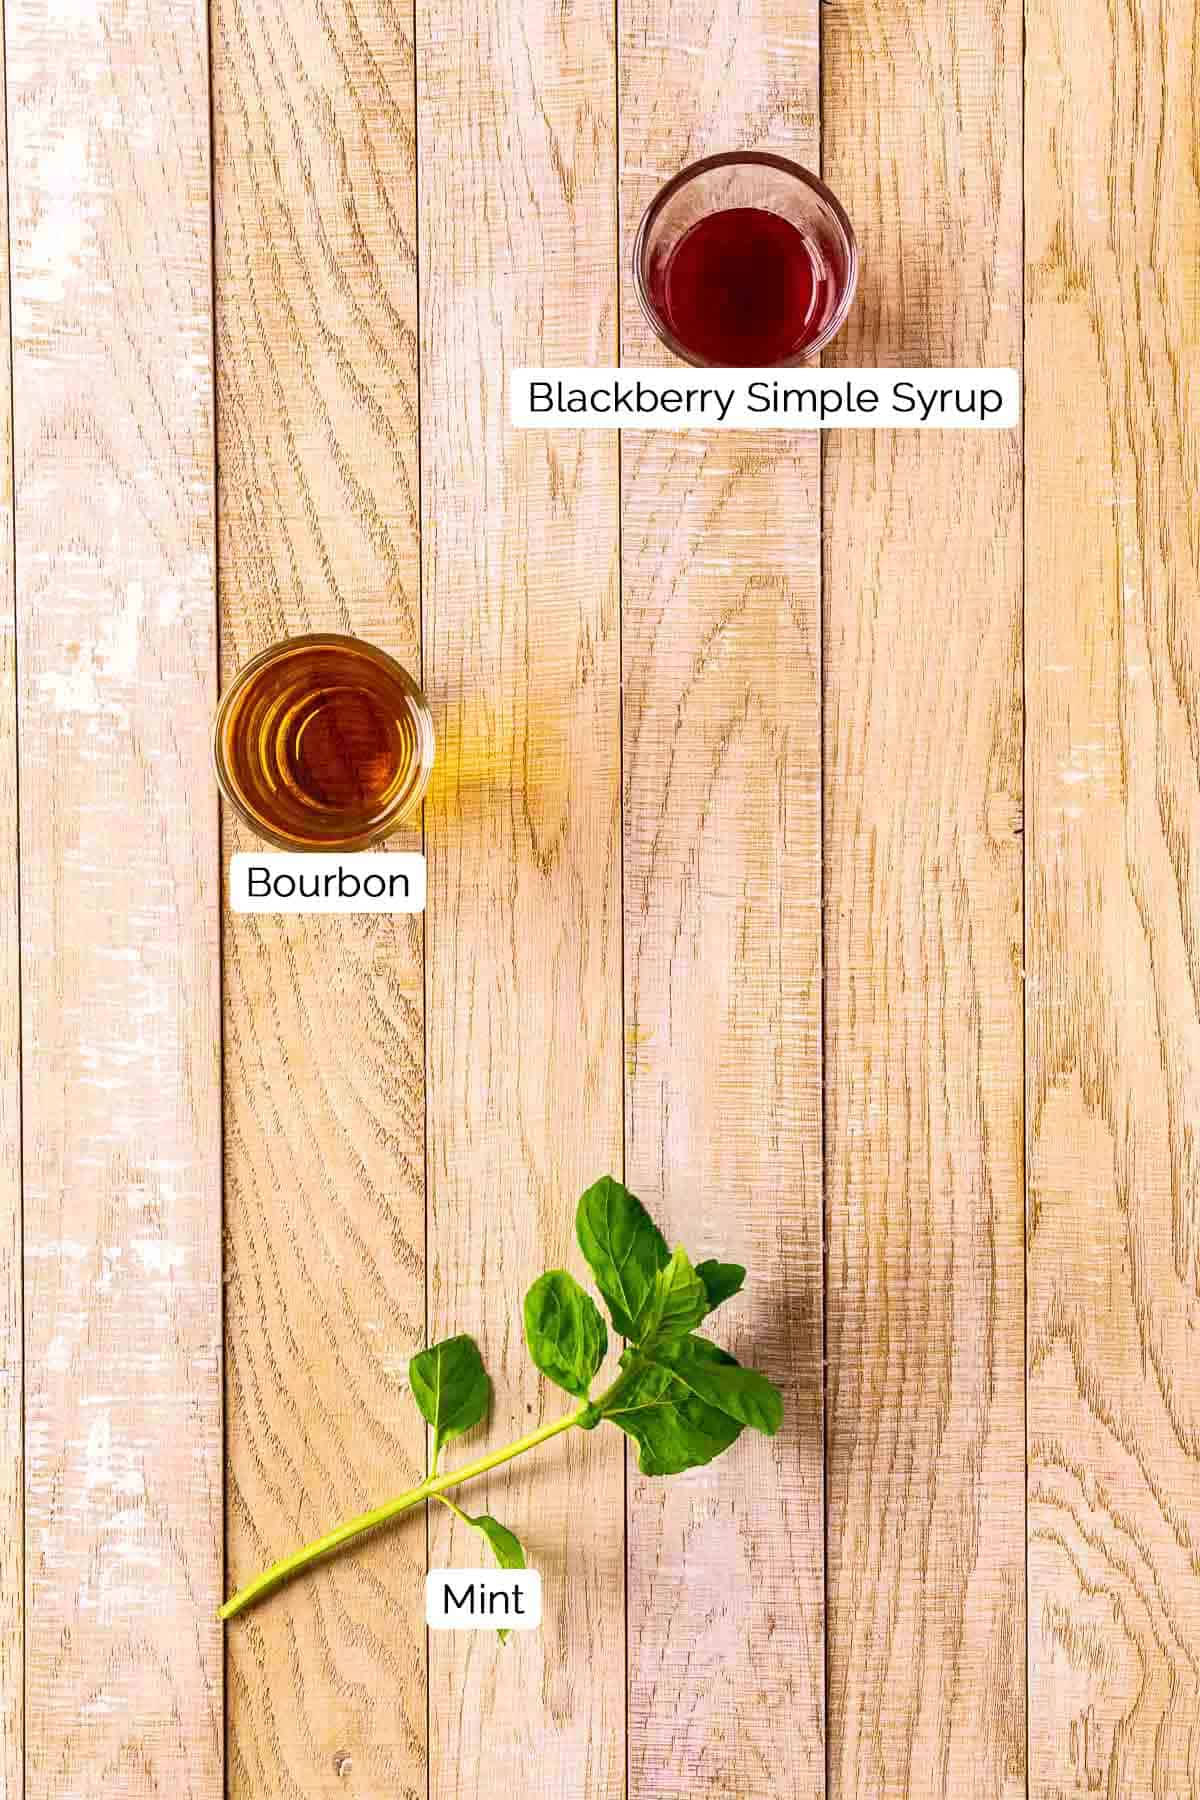 The three ingredients on a cream-colored wooden board with white and black labels.